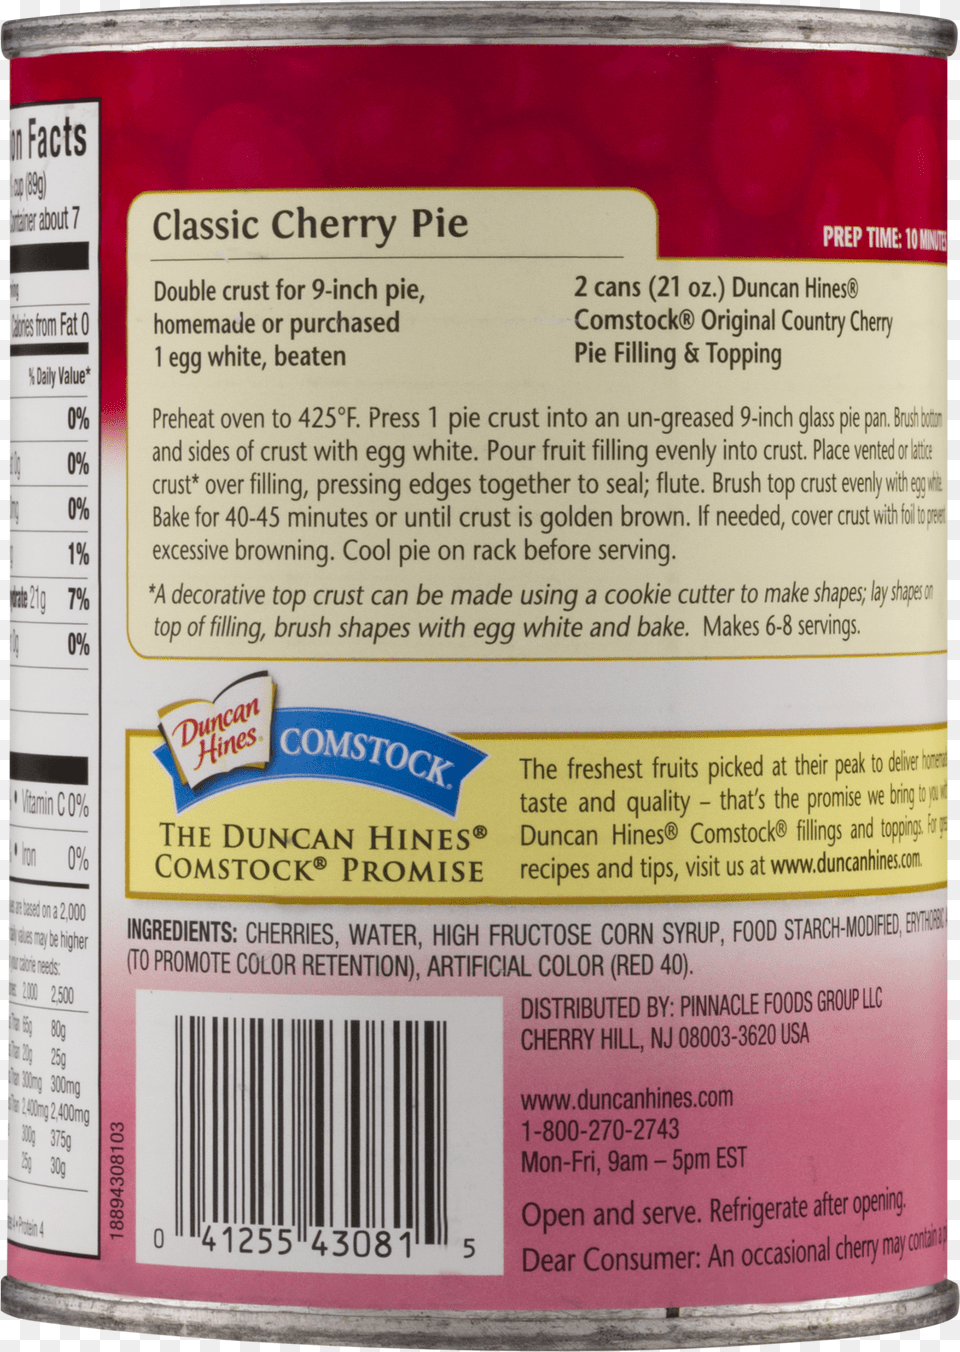 Comstock Original Country Cherry Pie Filling Or Topping, Aluminium, Tin, Can, Canned Goods Free Png Download